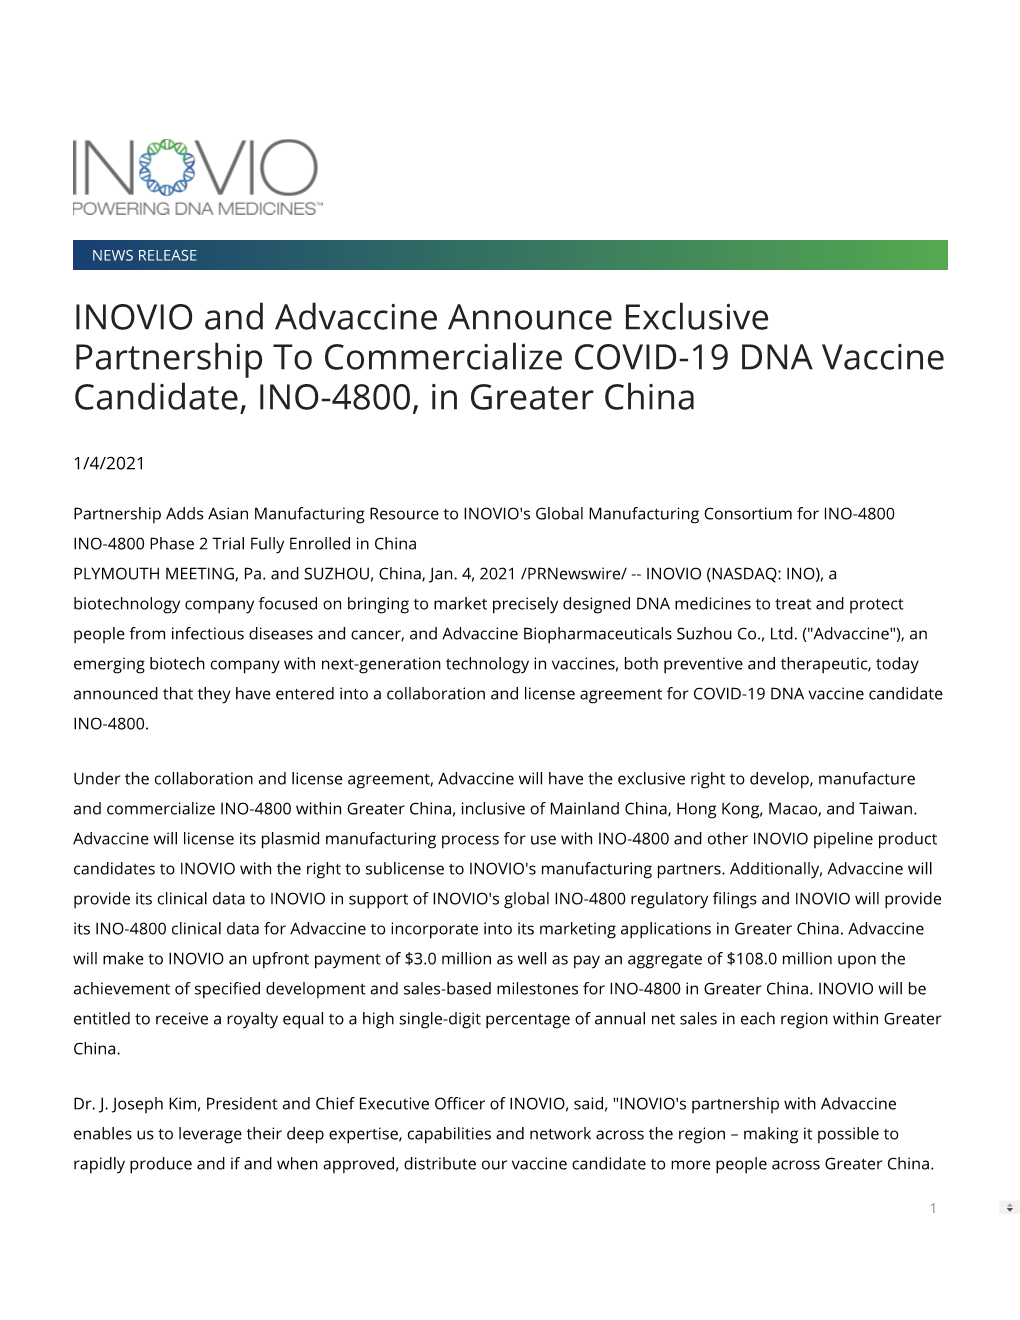 INOVIO and Advaccine Announce Exclusive Partnership to Commercialize COVID-19 DNA Vaccine Candidate, INO-4800, in Greater China